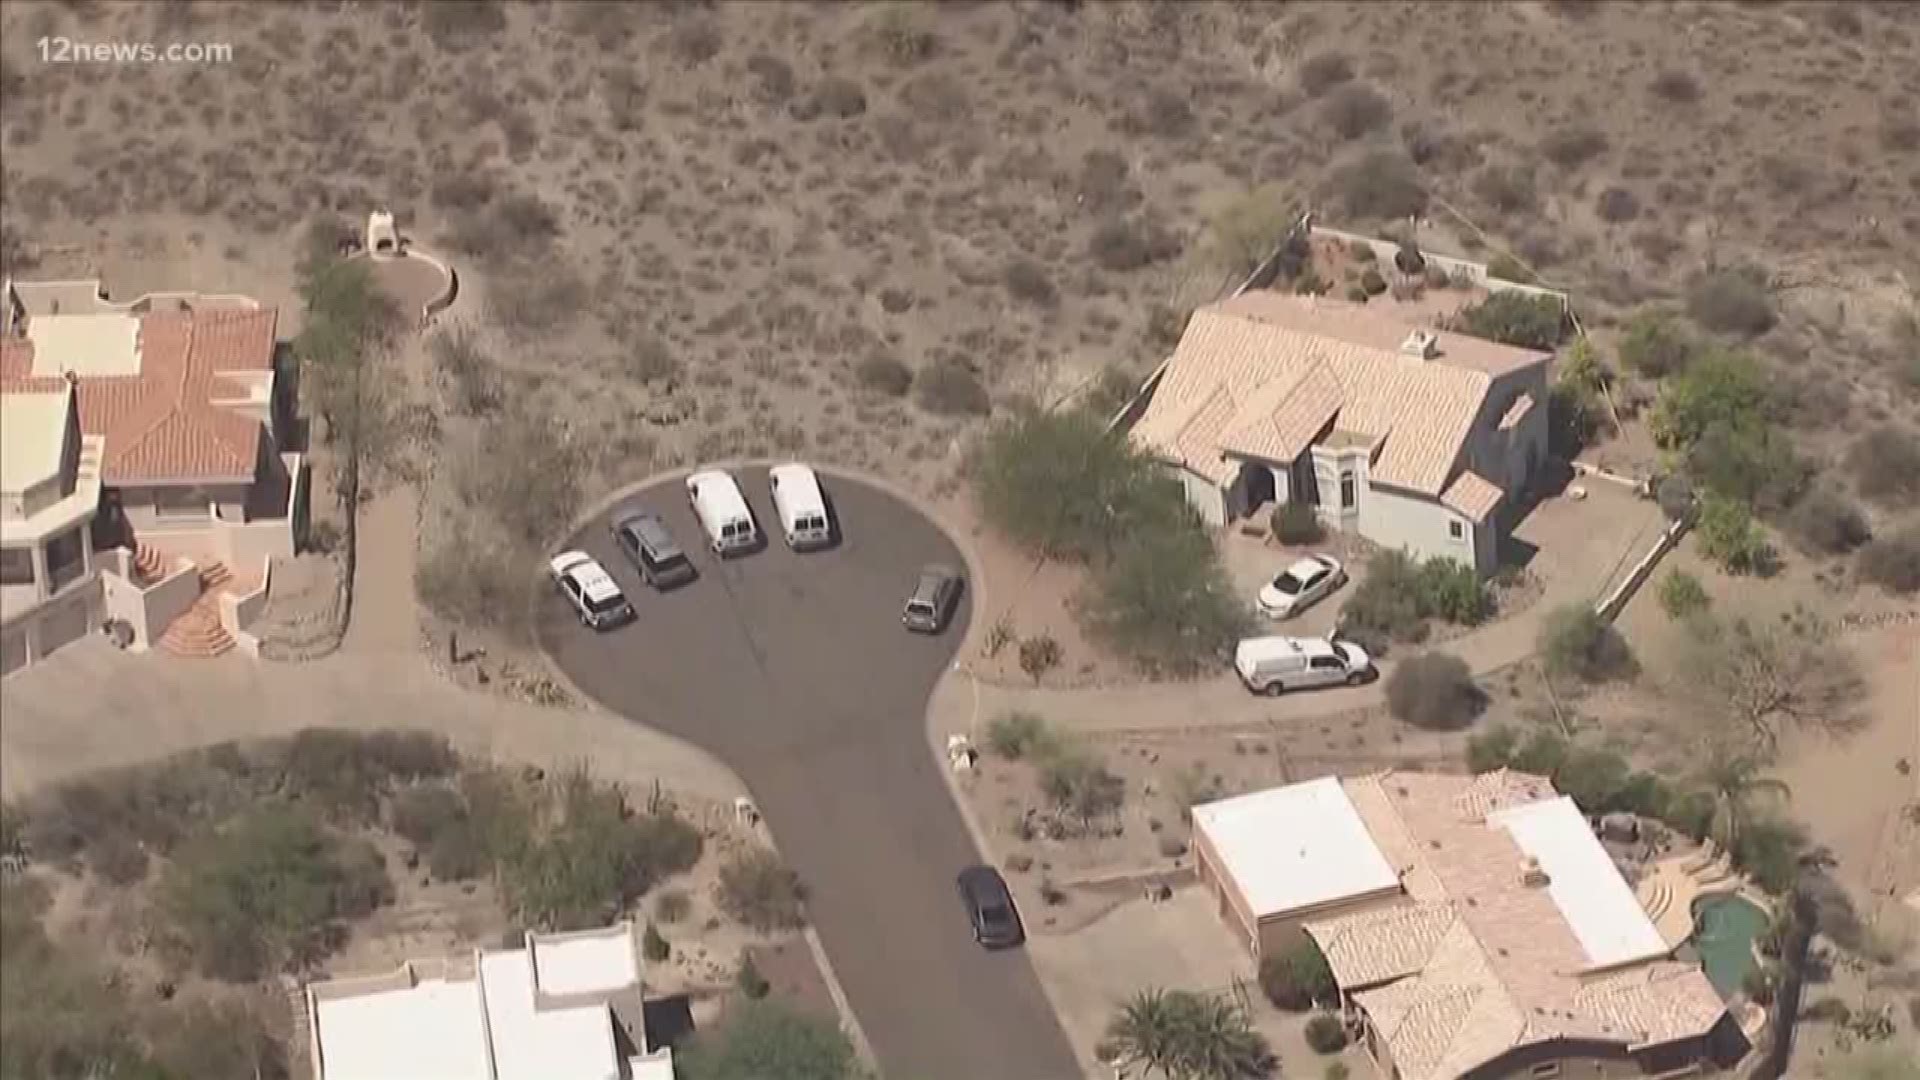 Two people were found shot and killed in a Fountain Hills home. Police say their deaths are connected to the shooting rampage committed by Dwight Jones.